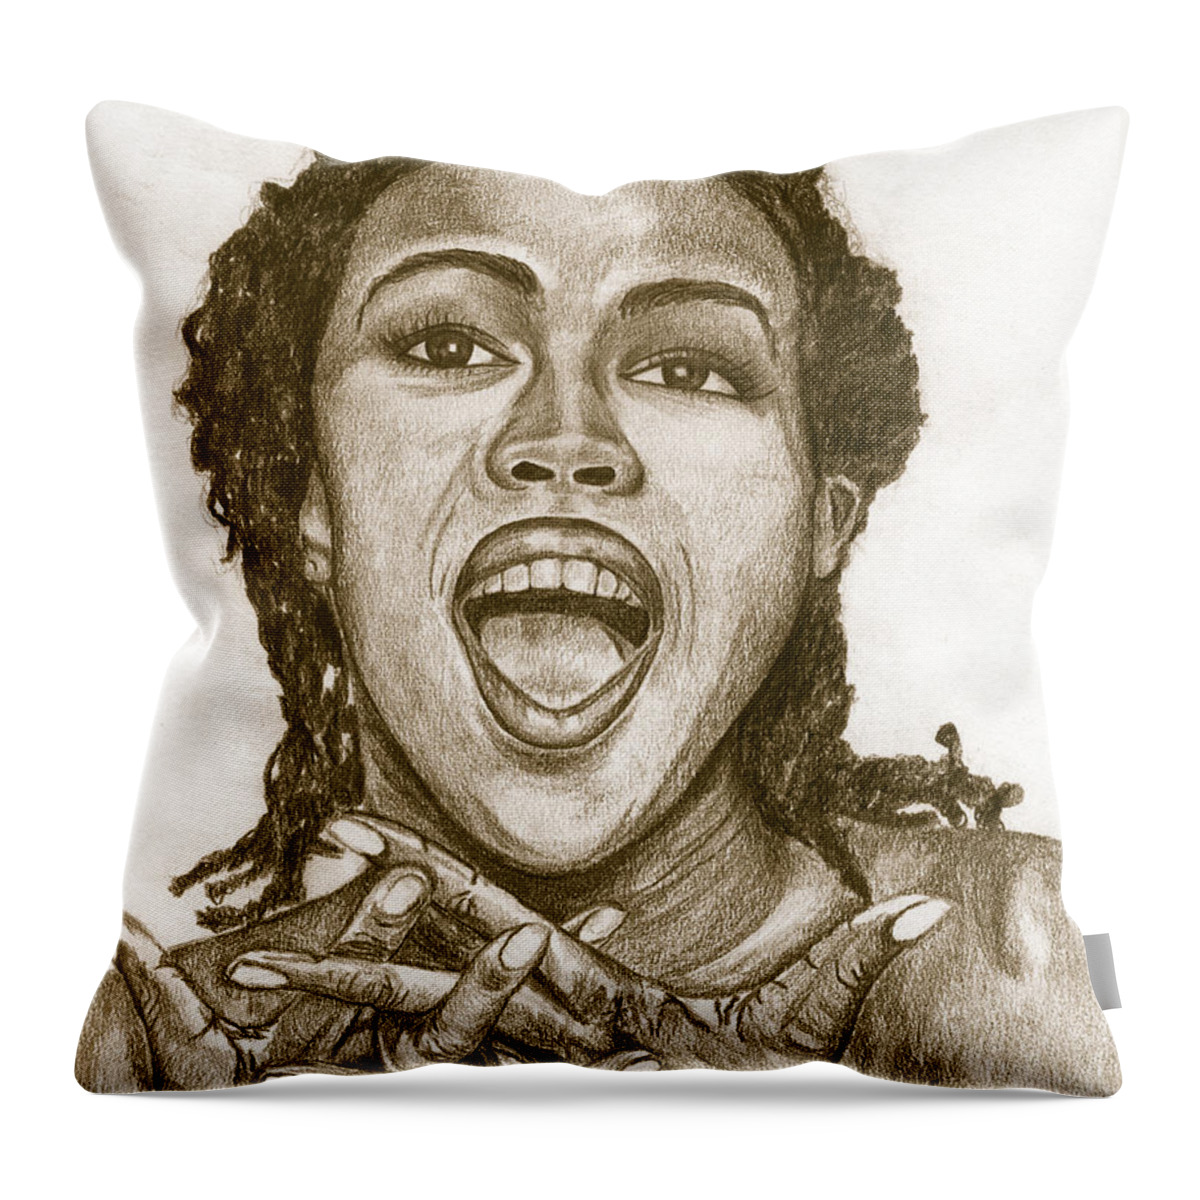 Lauryn Hill Throw Pillow featuring the painting Lauryn Hill by Debbie DeWitt